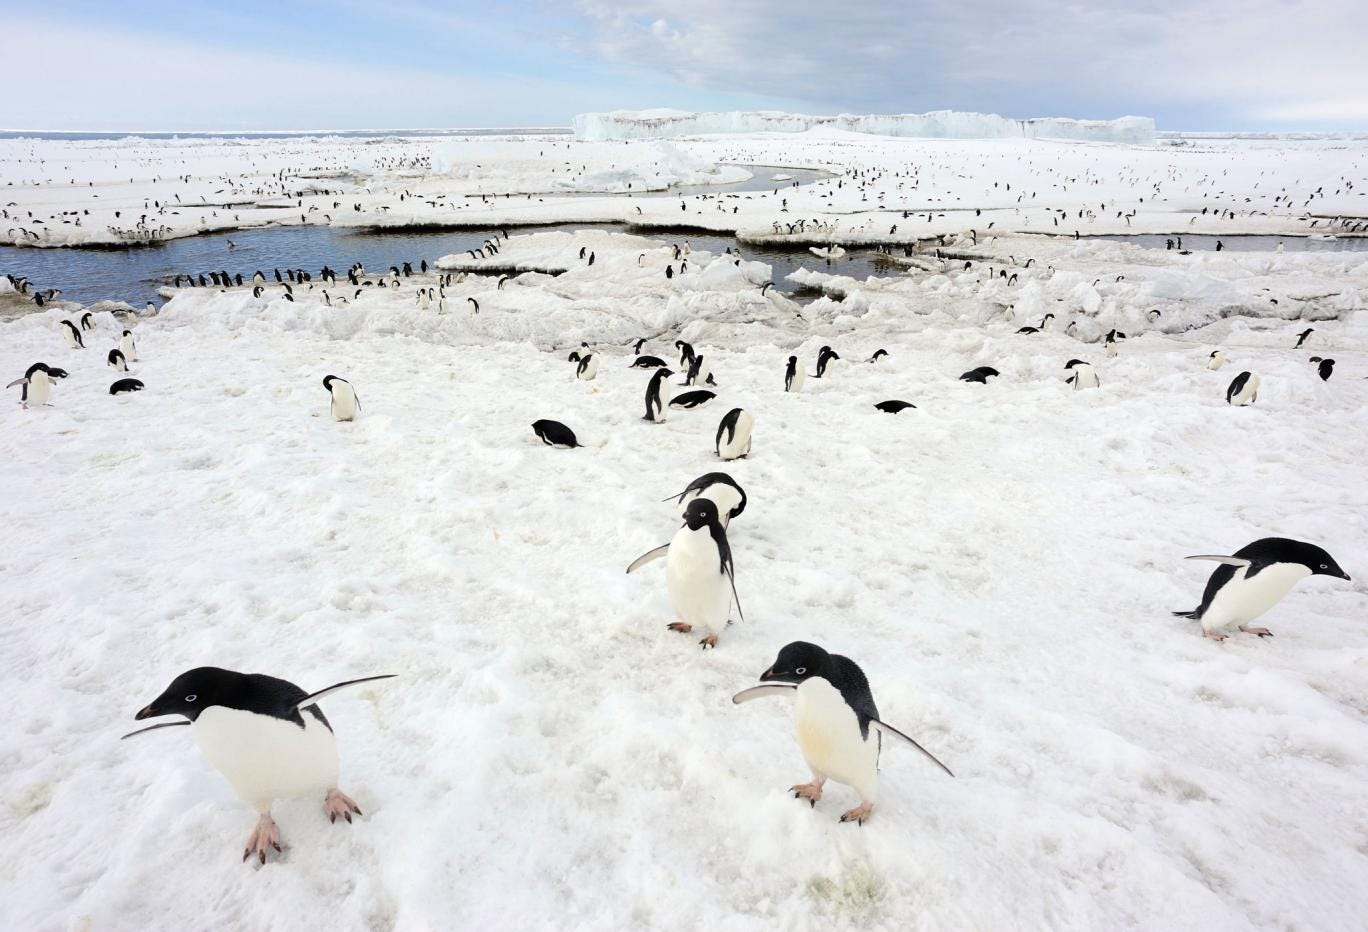 A colony of Adelie penguins in Antarctica, who experts say are finding it harder to find food as sea ice melts. In a separate study, scientists say Magellanic penguins in Argentina are being killed by global warming